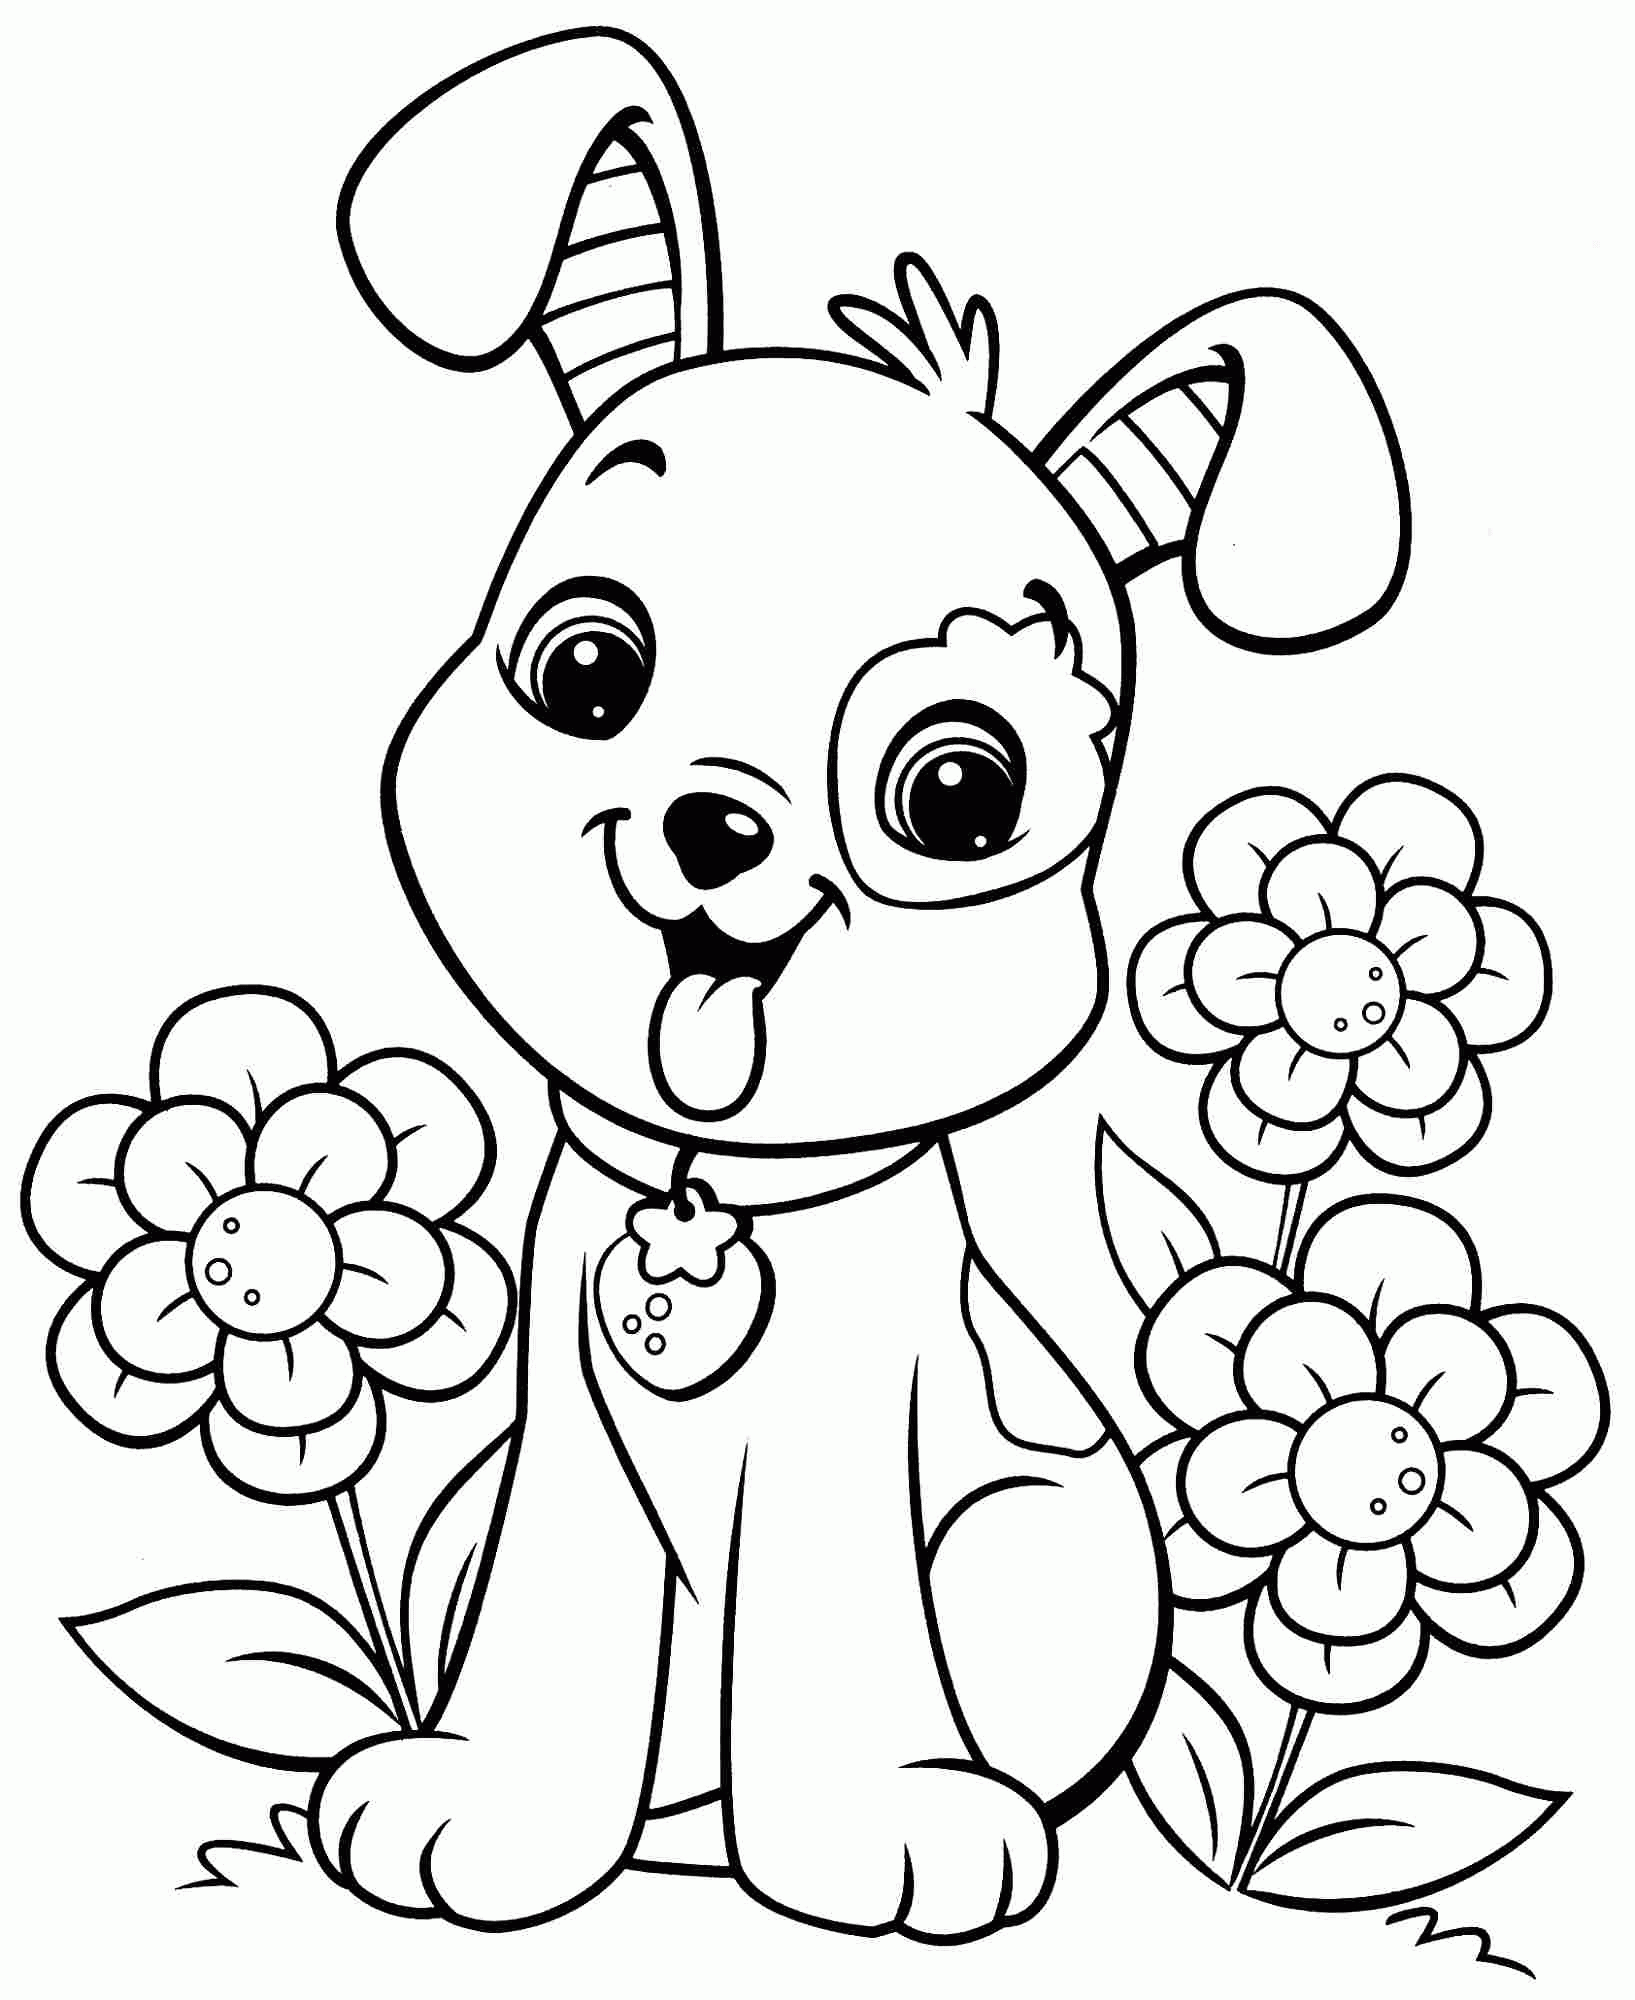 coloring pages cartoon cartoon princess coloring page free printable coloring pages cartoon coloring pages 